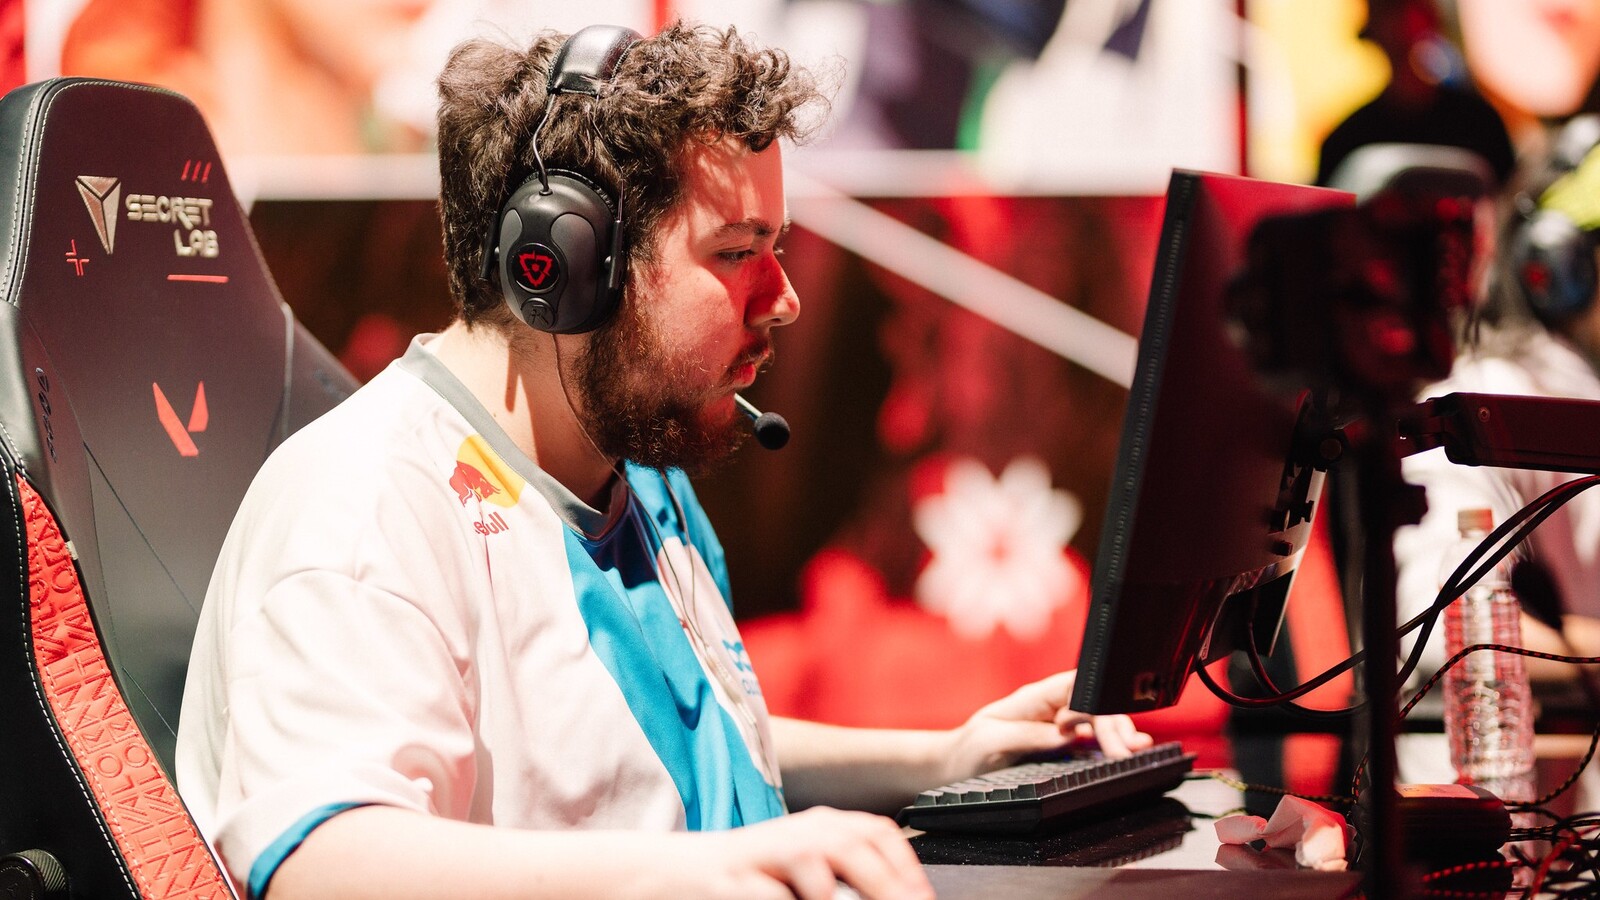 Cloud9 leaf surprised with VCT Americas run: “I thought we would definitely have some bad losses” – Egaxo